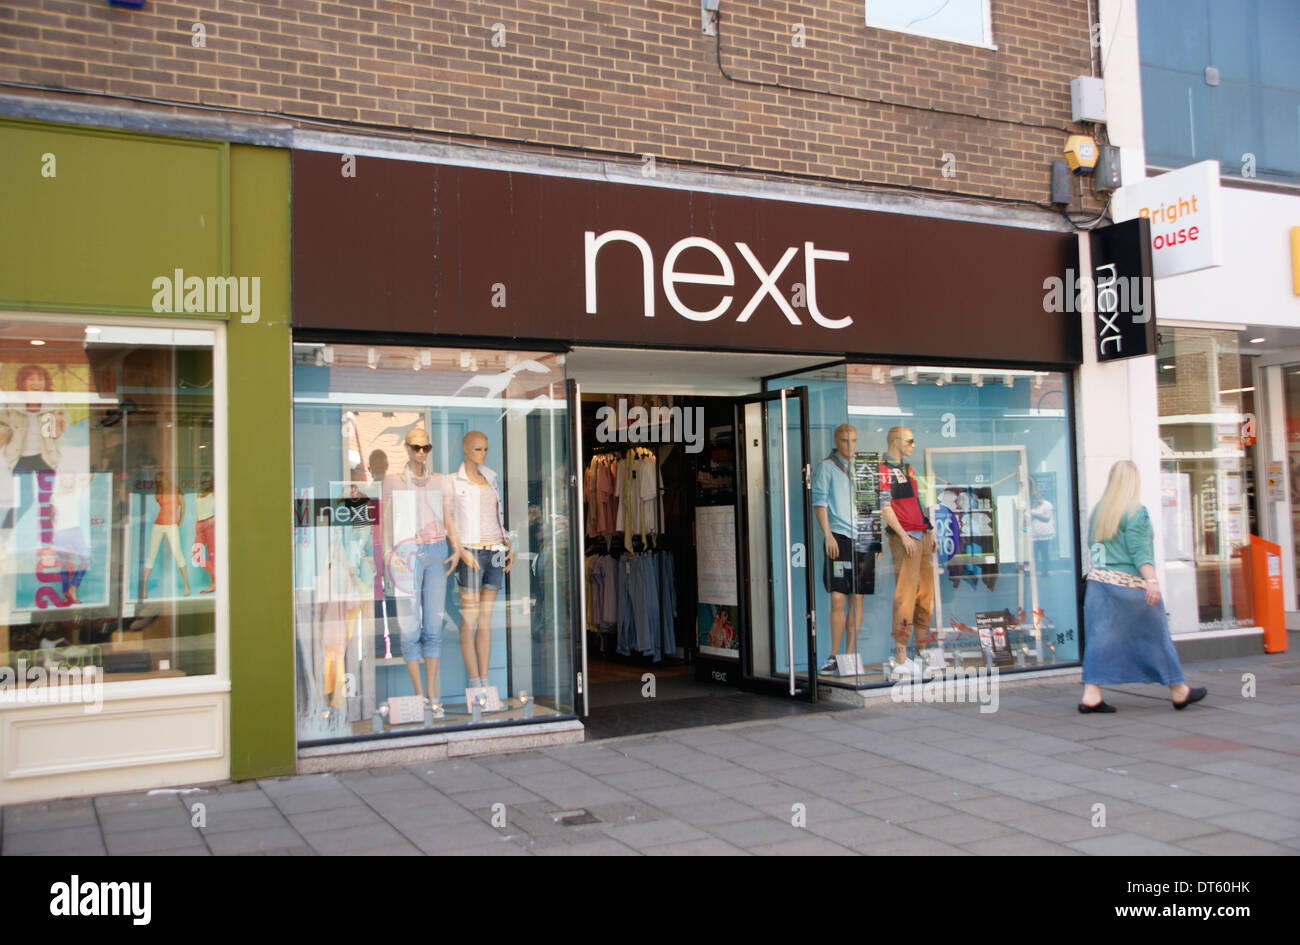 Next fashions high street retailers Worthing West Sussex UK Stock Photo